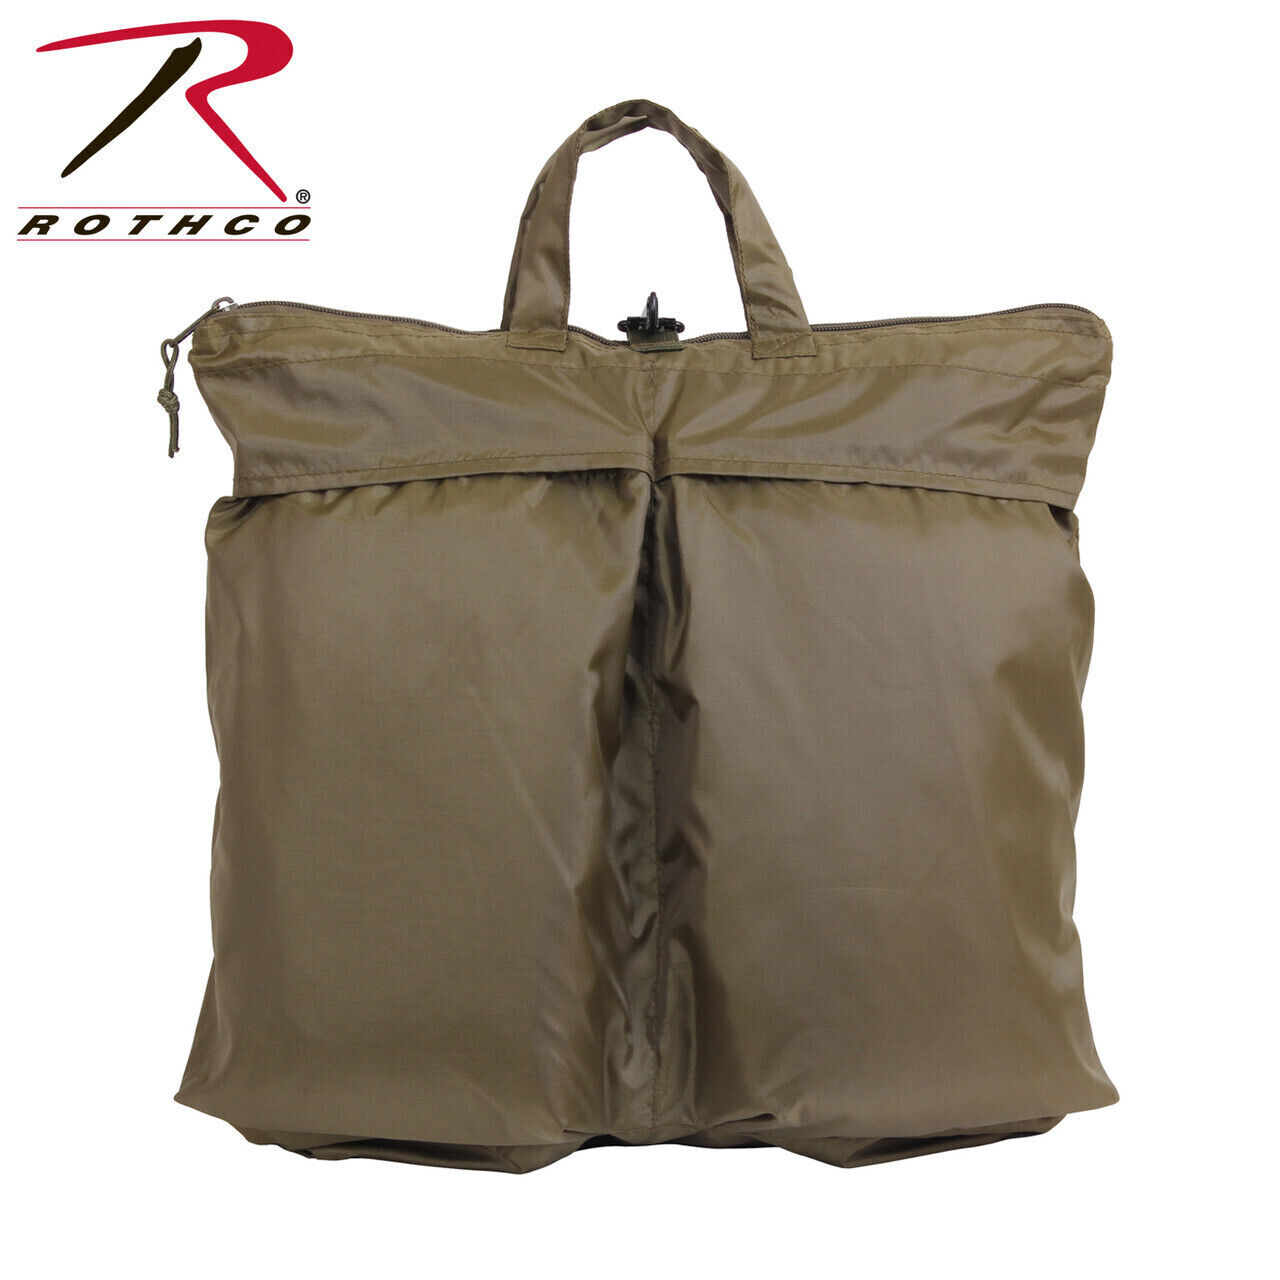 Rothco G.I. Type Flyers Helmet Bags - Olive Drab